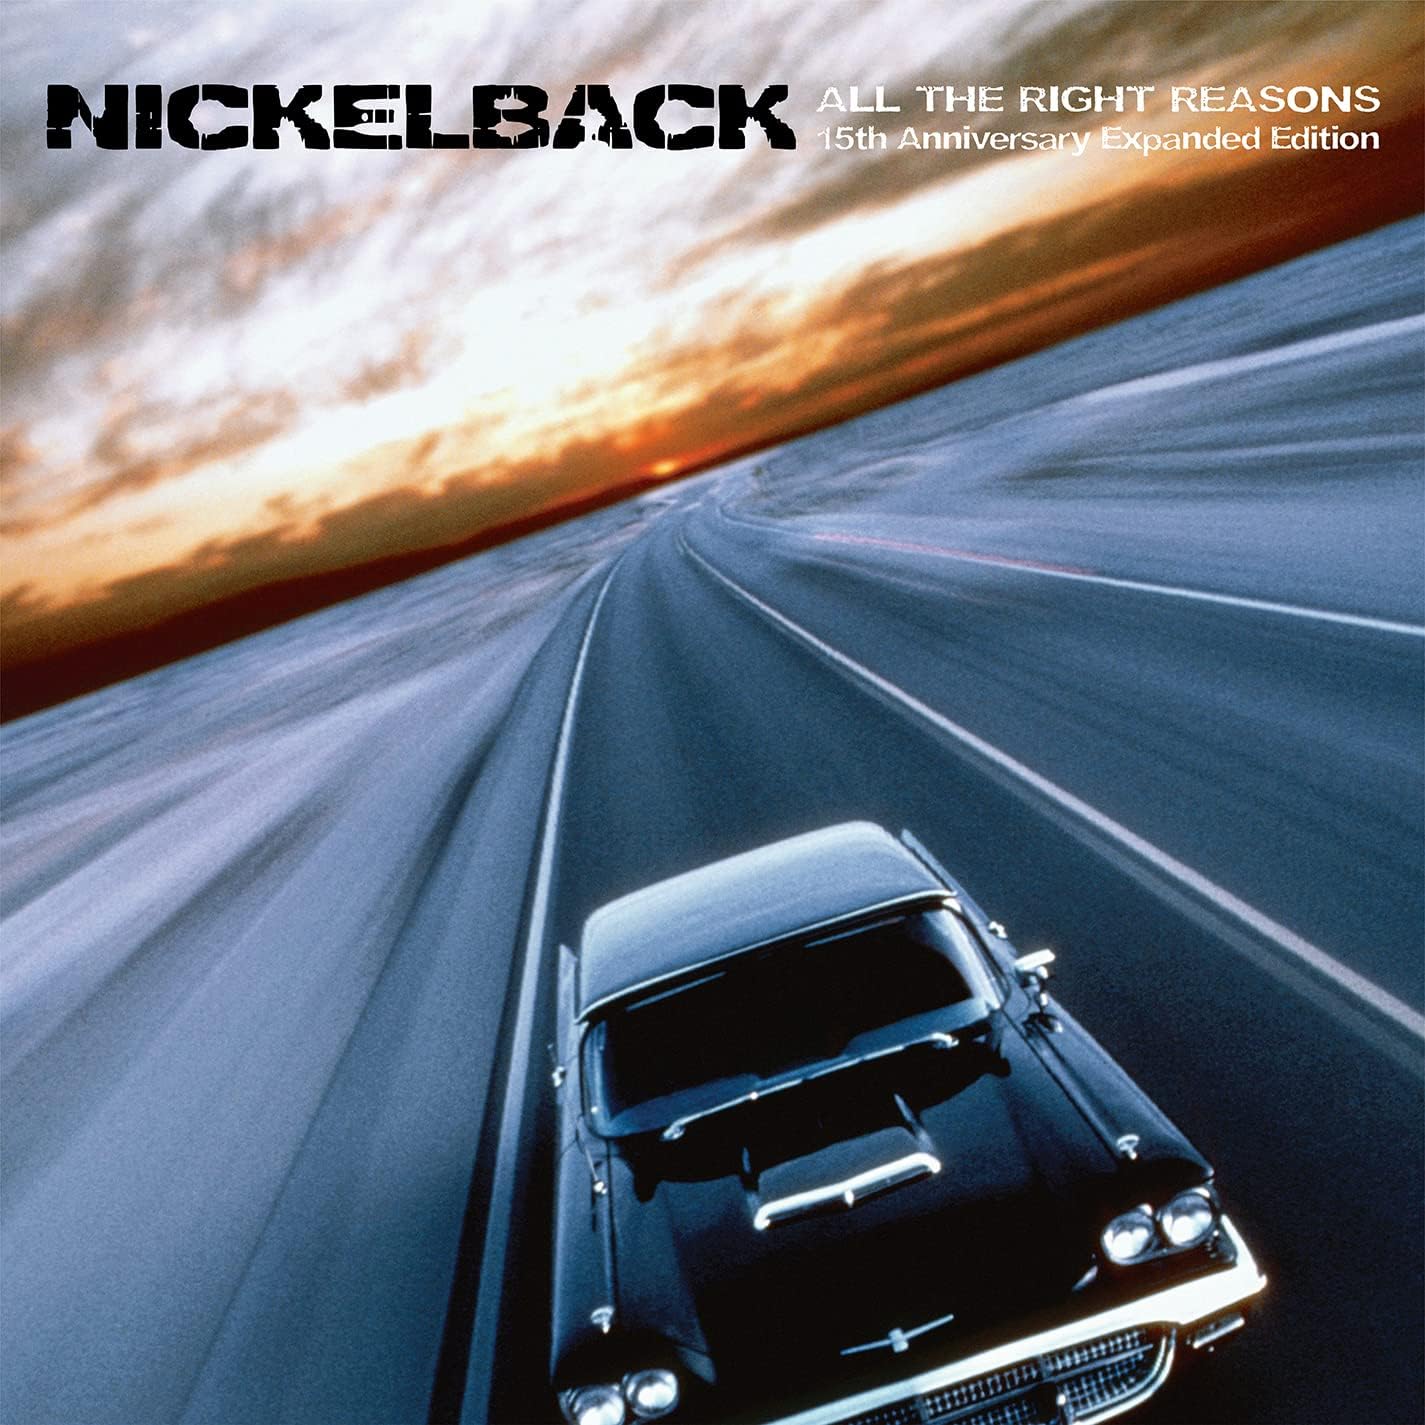 Nickelback - All The Right Reasons album cover